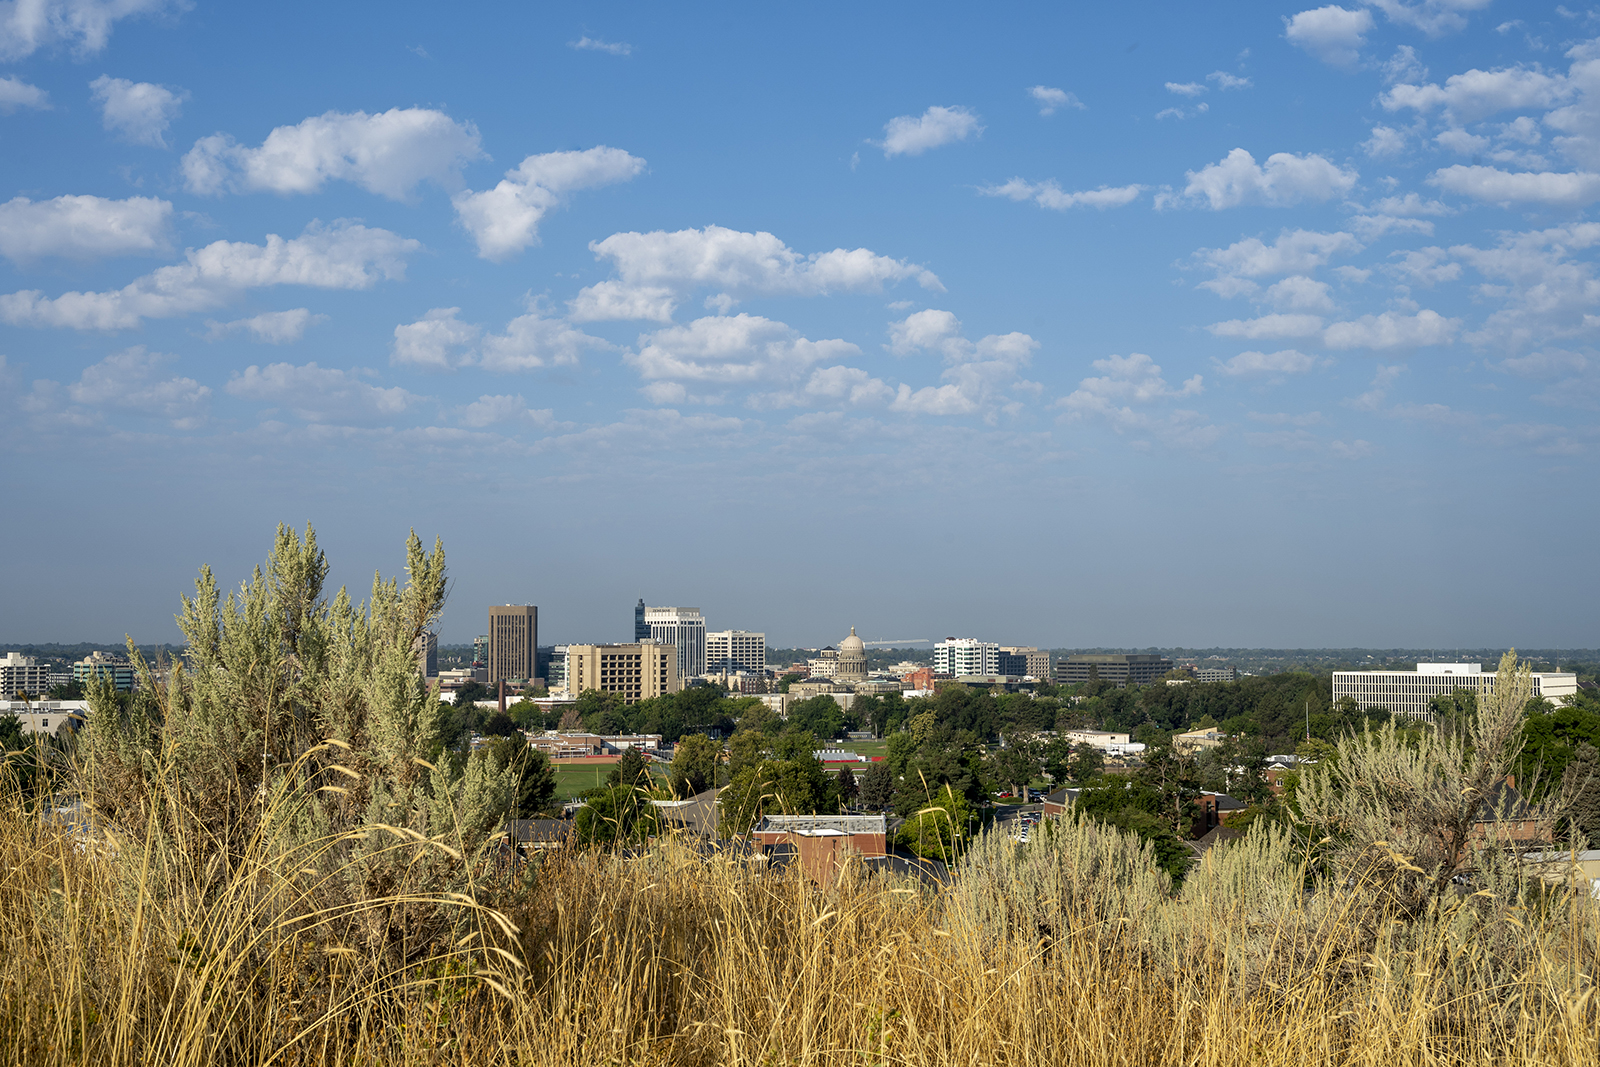 a photo overlooking the city of Boise from above, next to a large sagebrush plant